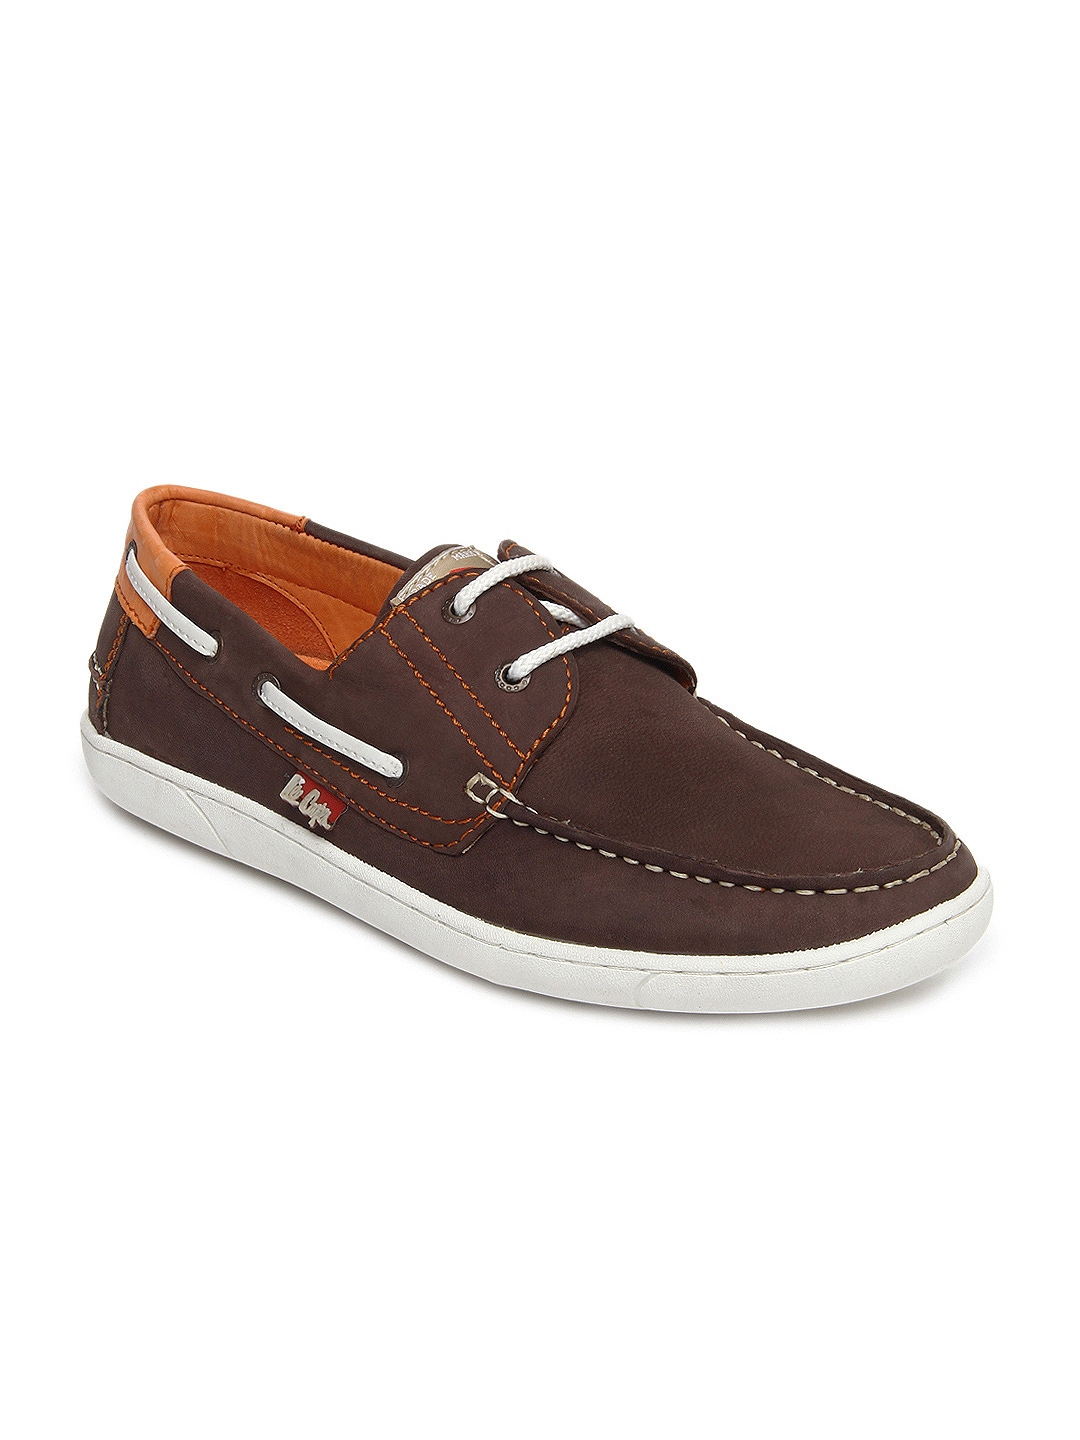 Buy Lee Cooper Men Brown Leather Boat Shoes - Casual Shoes for Men 204445 |  Myntra